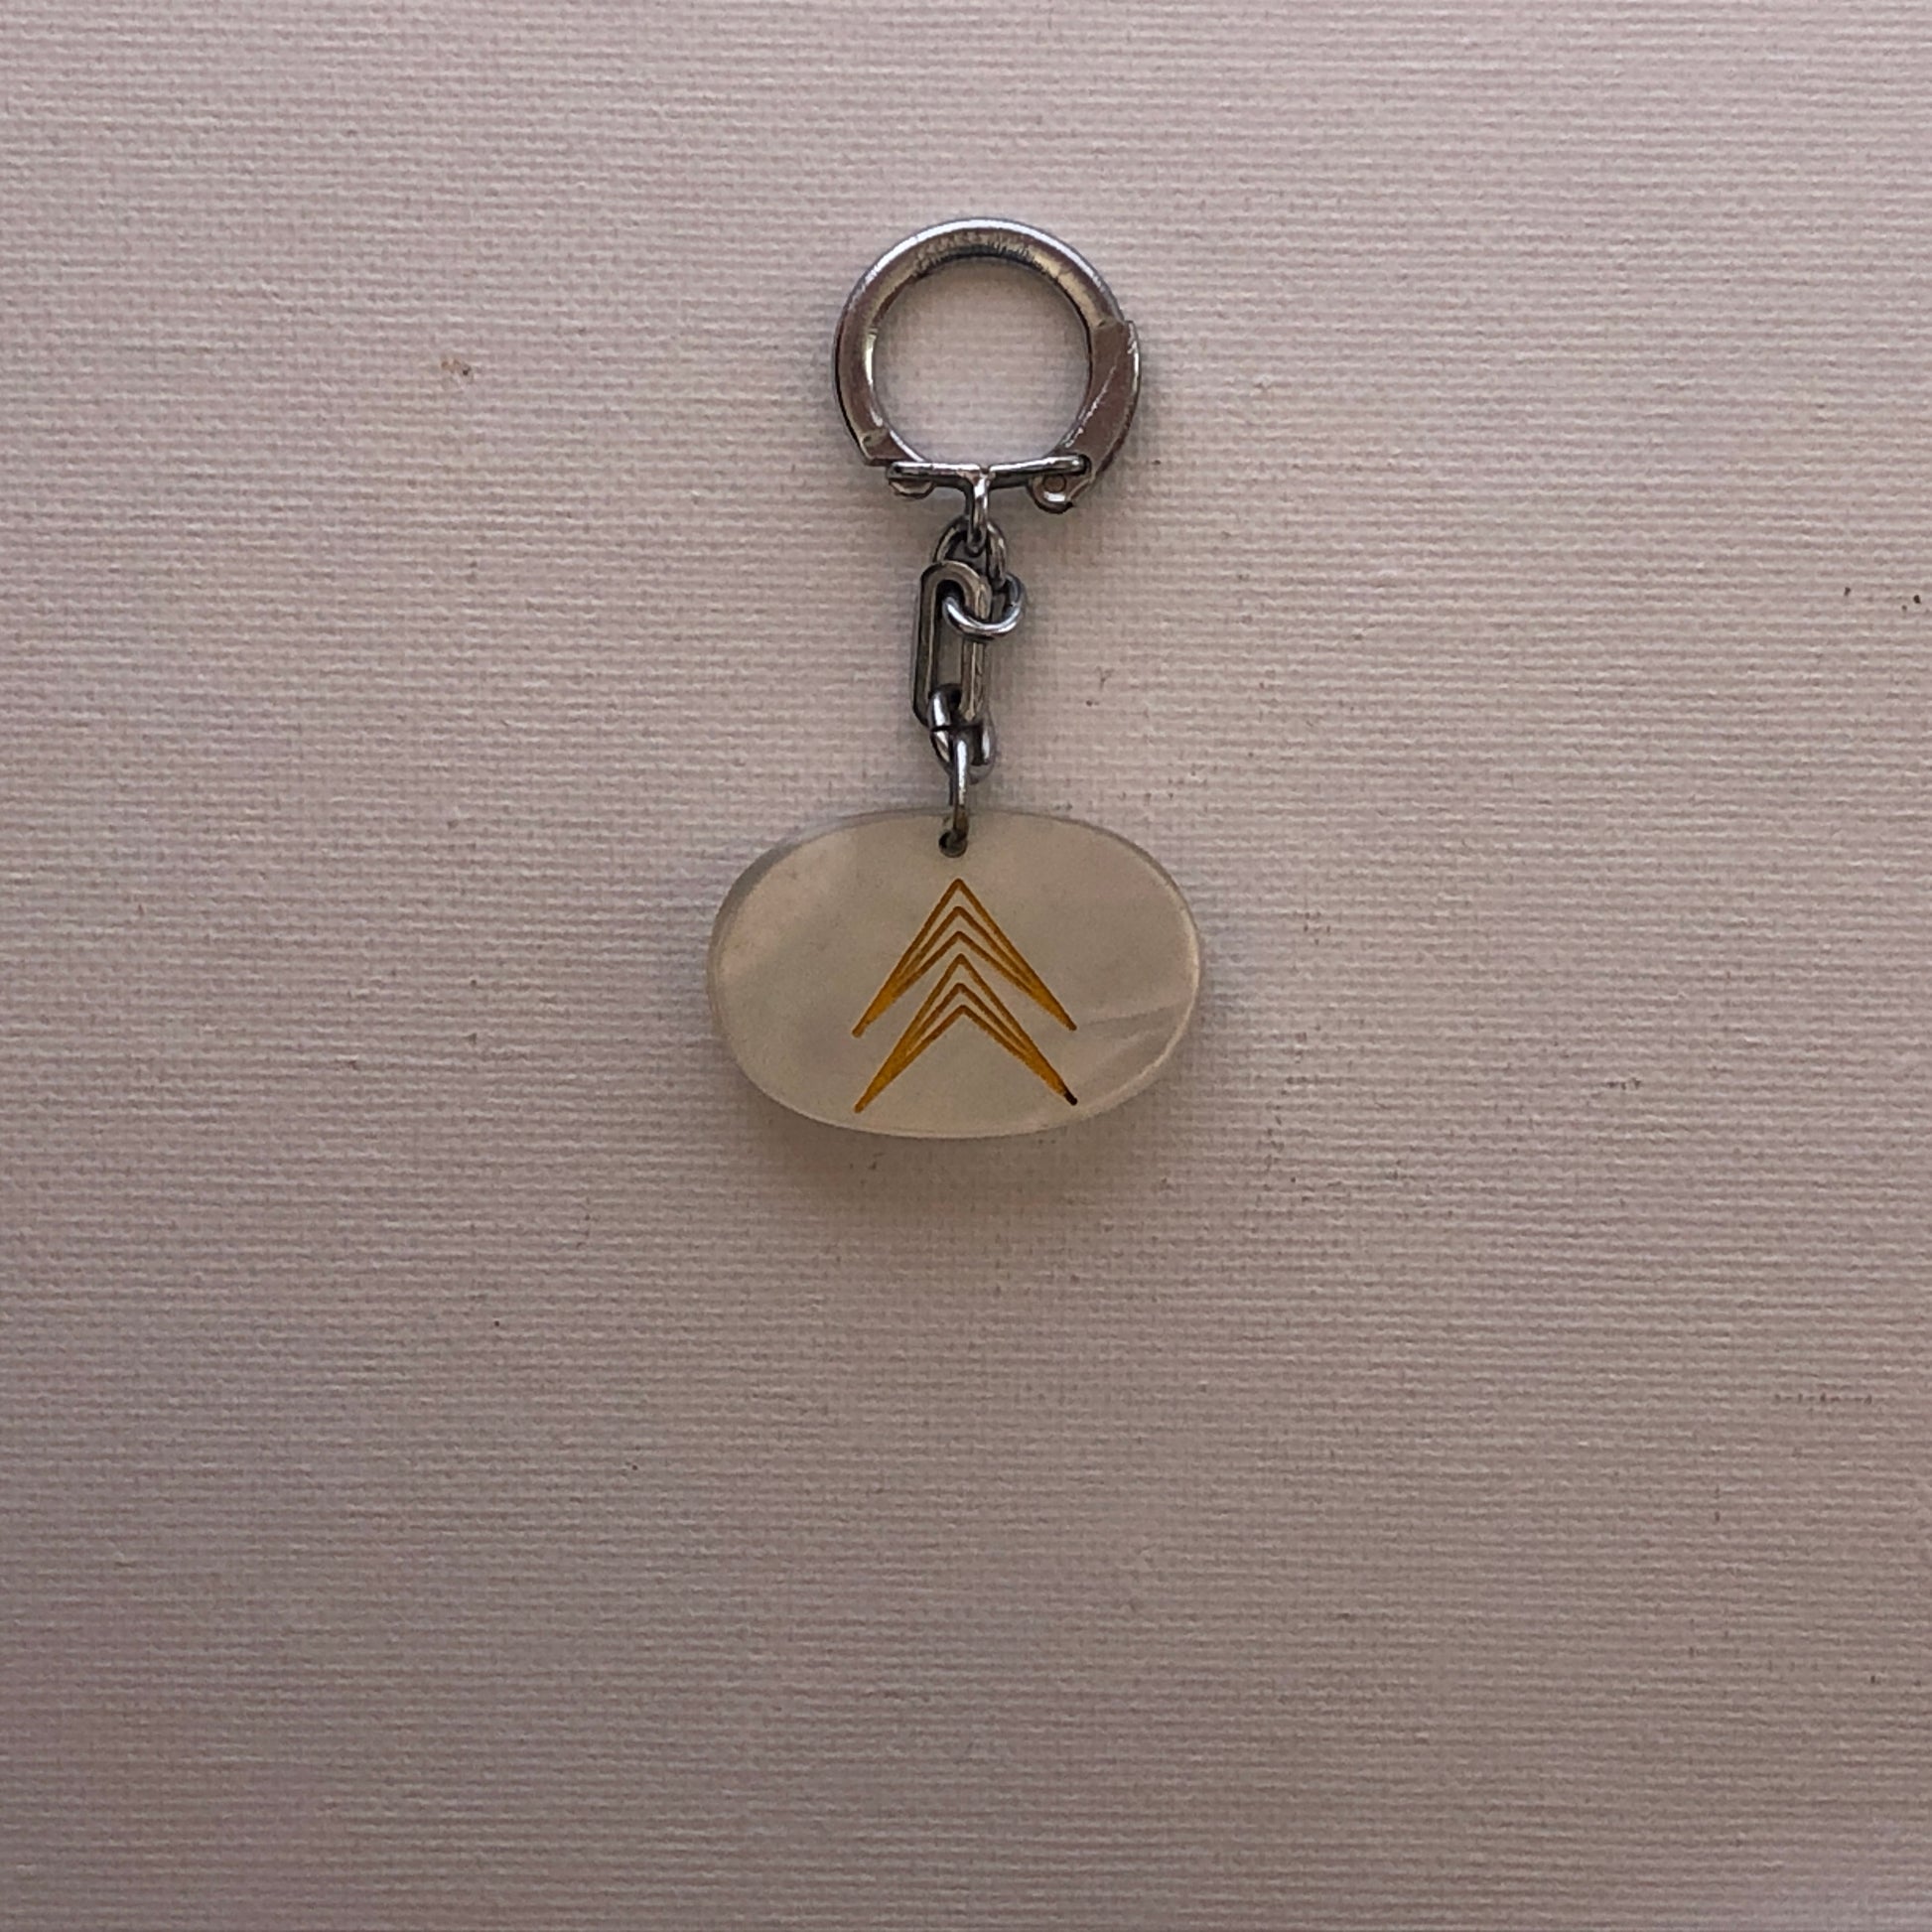 Citroën, Keychain with Citroën Emblem, Years and Different Materials